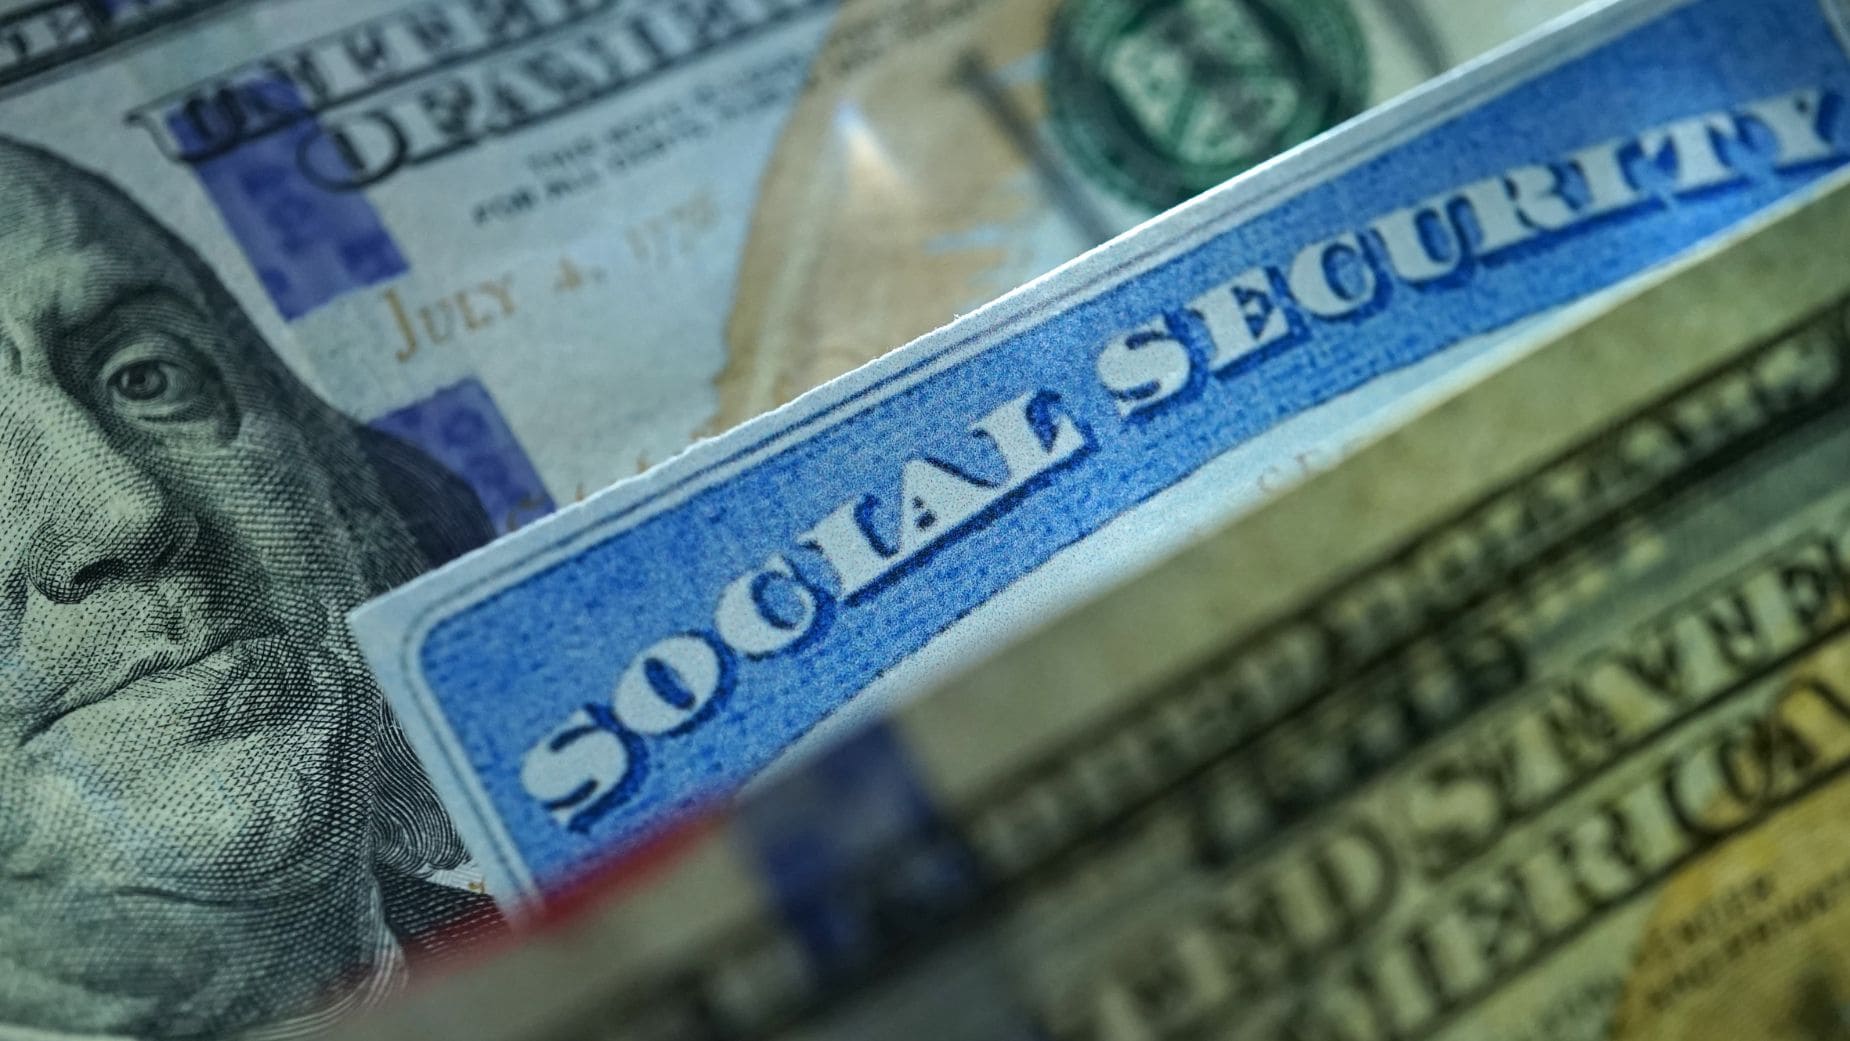 You have to meet some requirements to get a Social Security check